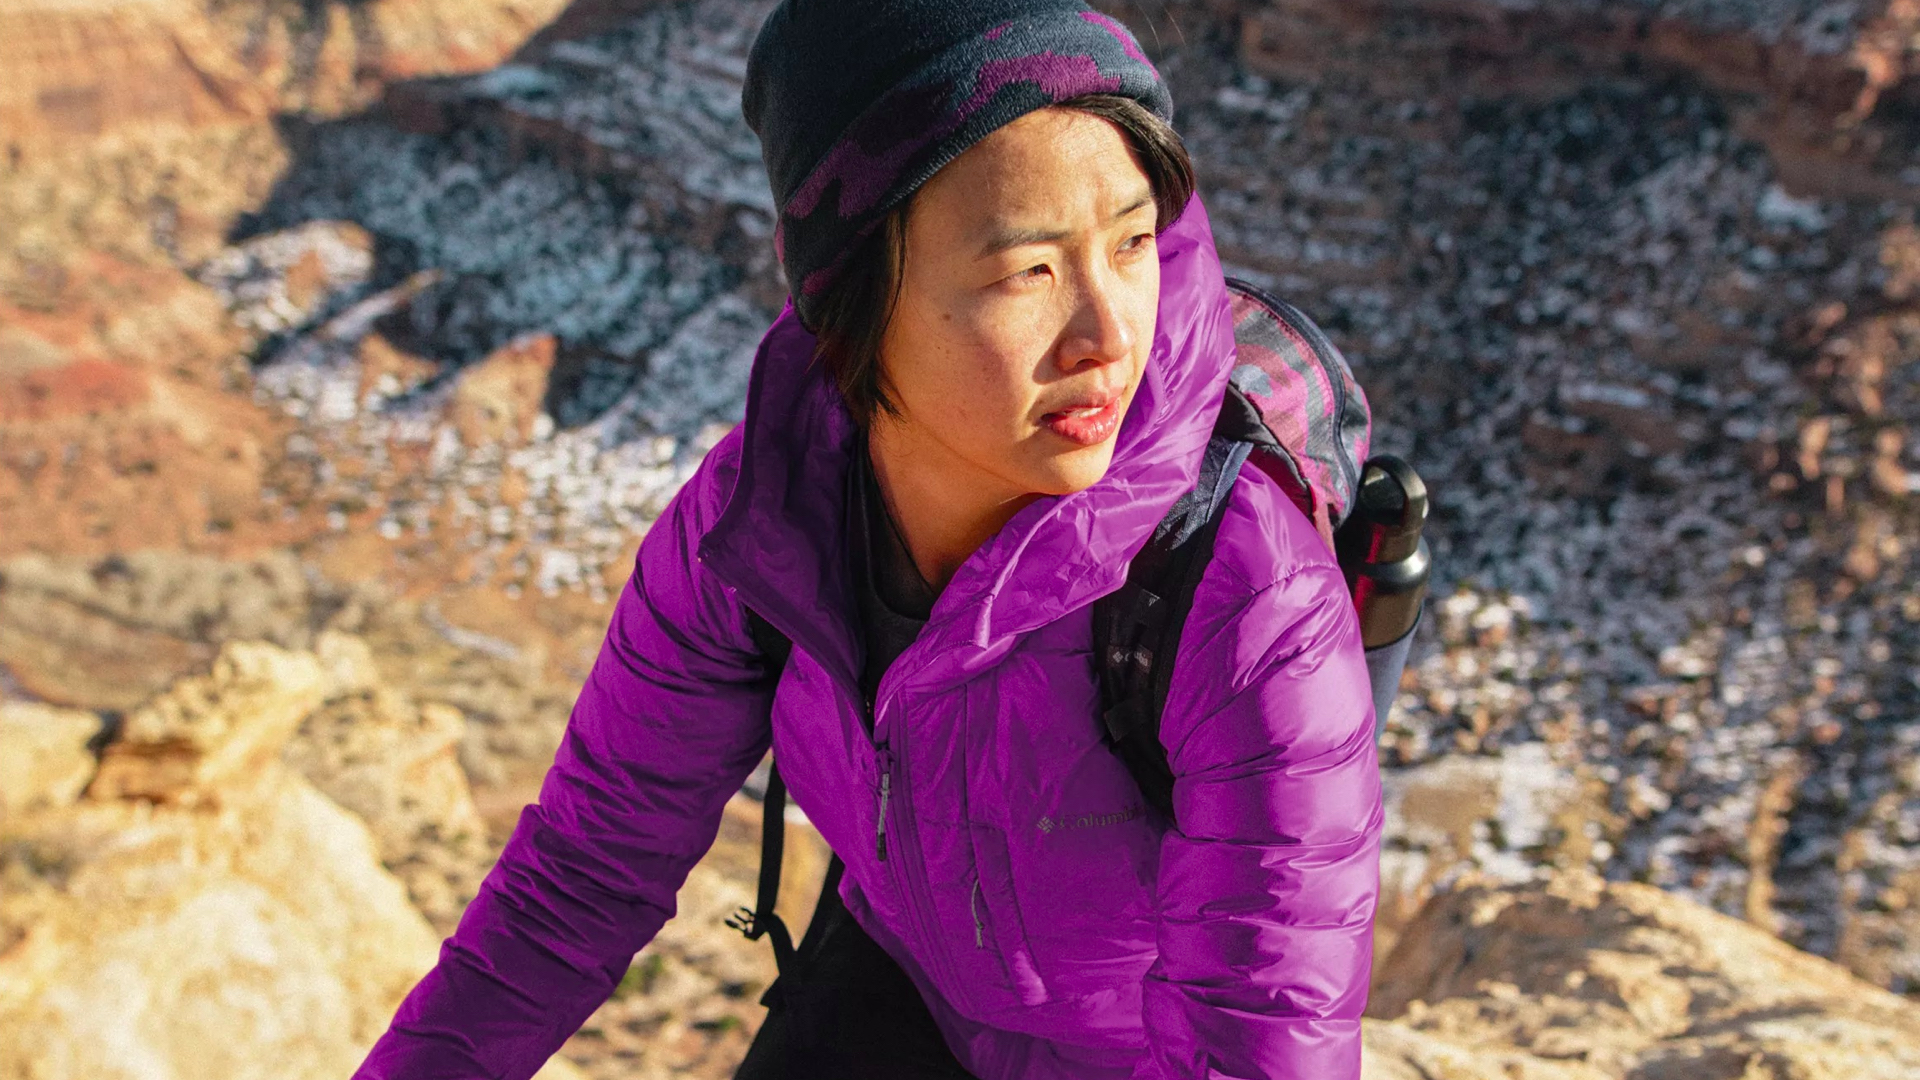 The 5 types of insulated jackets for hiking